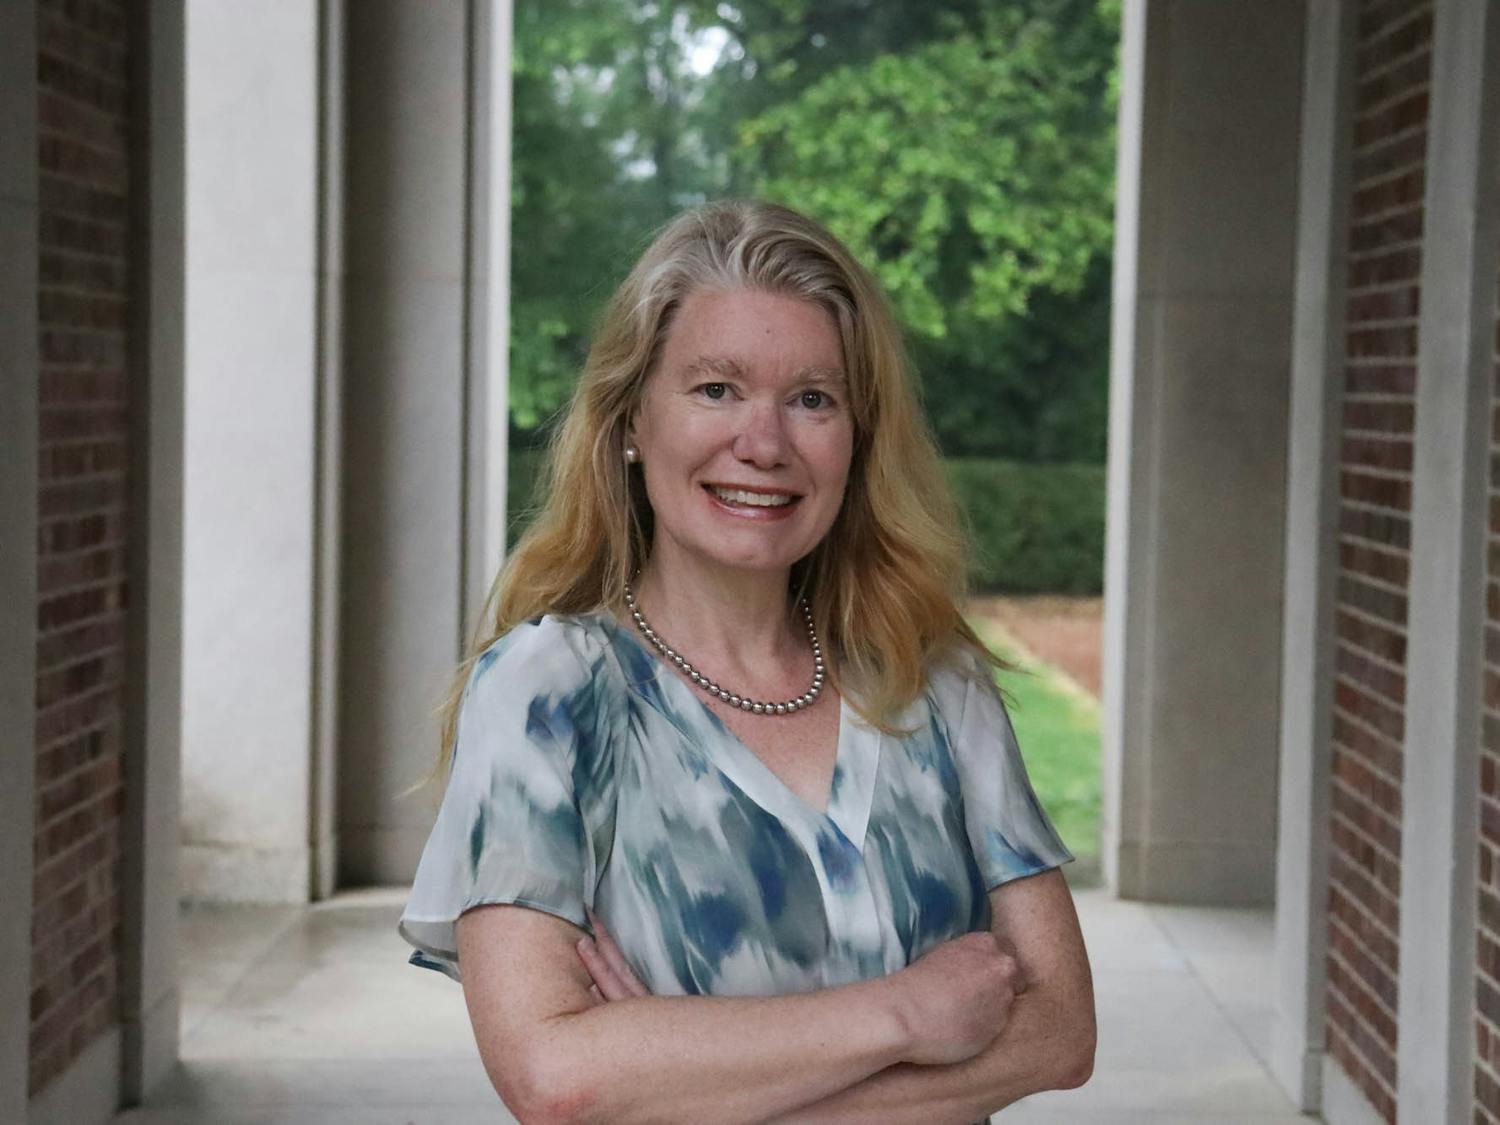 Amy Gladfelter, an adjunct professor of biology at UNC, is seen at Morehead-Patterson Bell Tower on Saturday, April 22, 2023. Amy Gladfelter and Robert Hummer, a distinguished professor of sociology at UNC, were elected to the American Academy of Arts and Sciences on April 19.